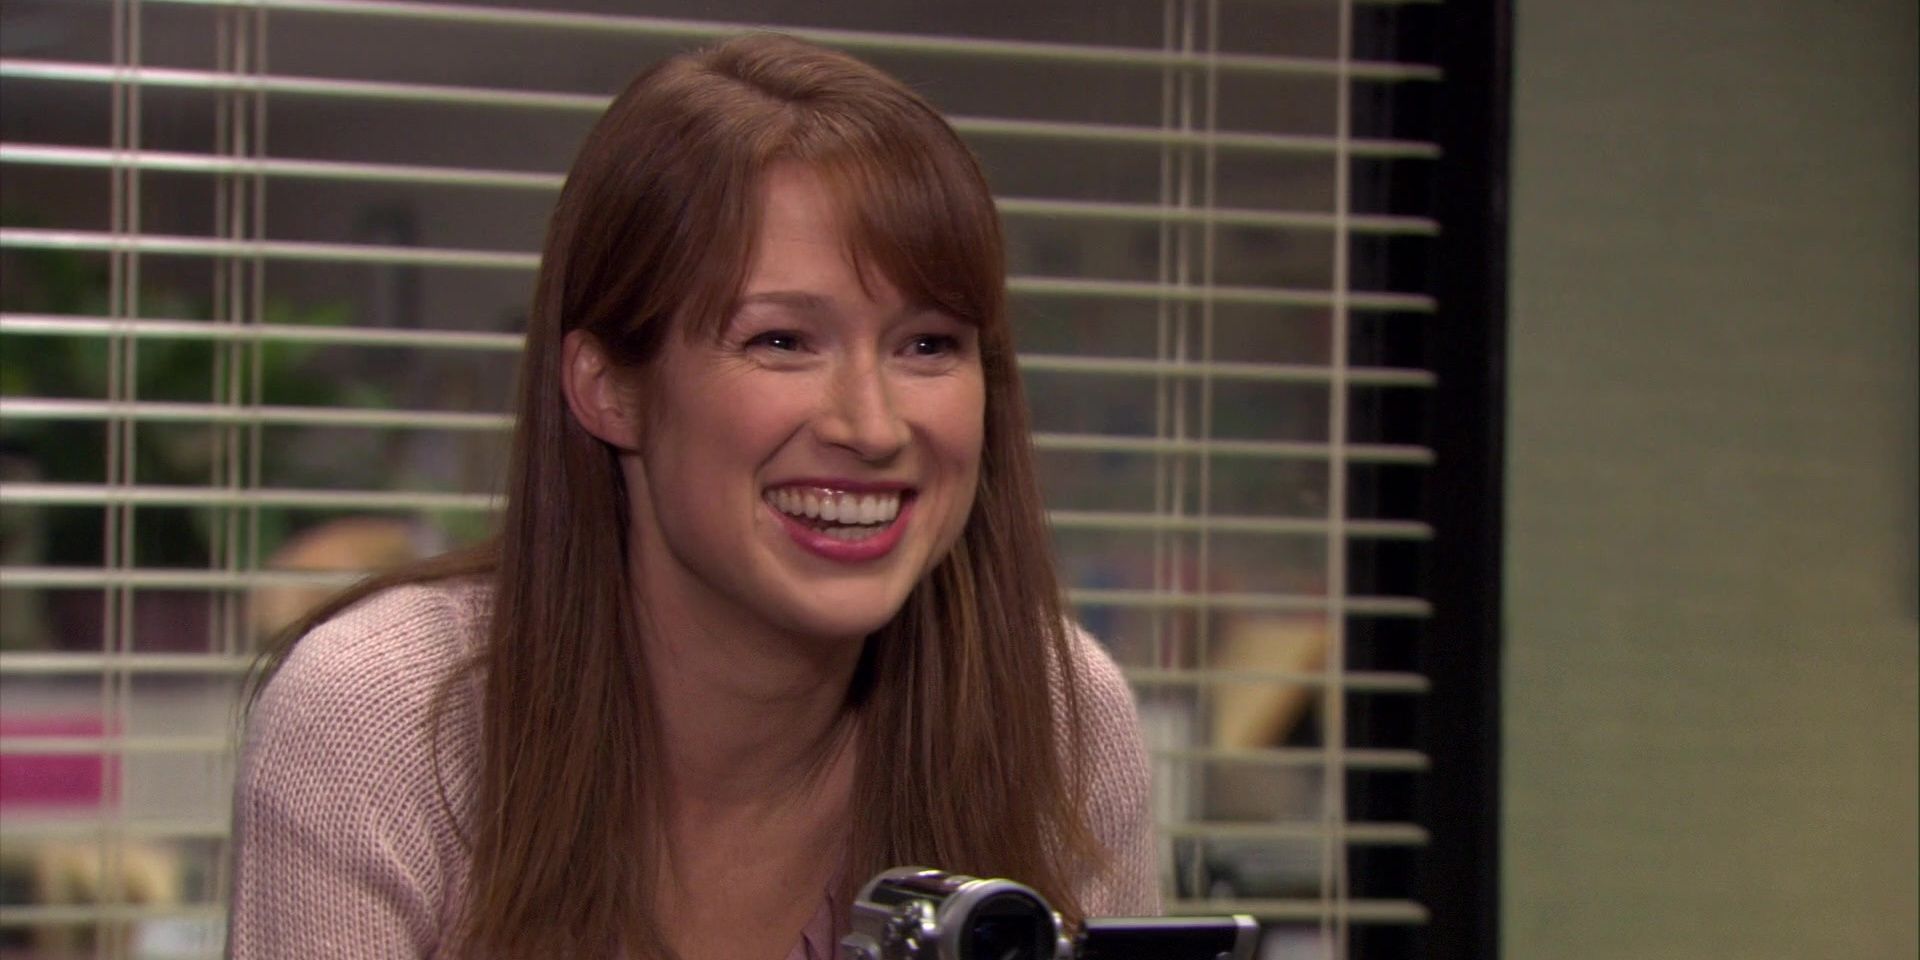 Erin smiling in The Office